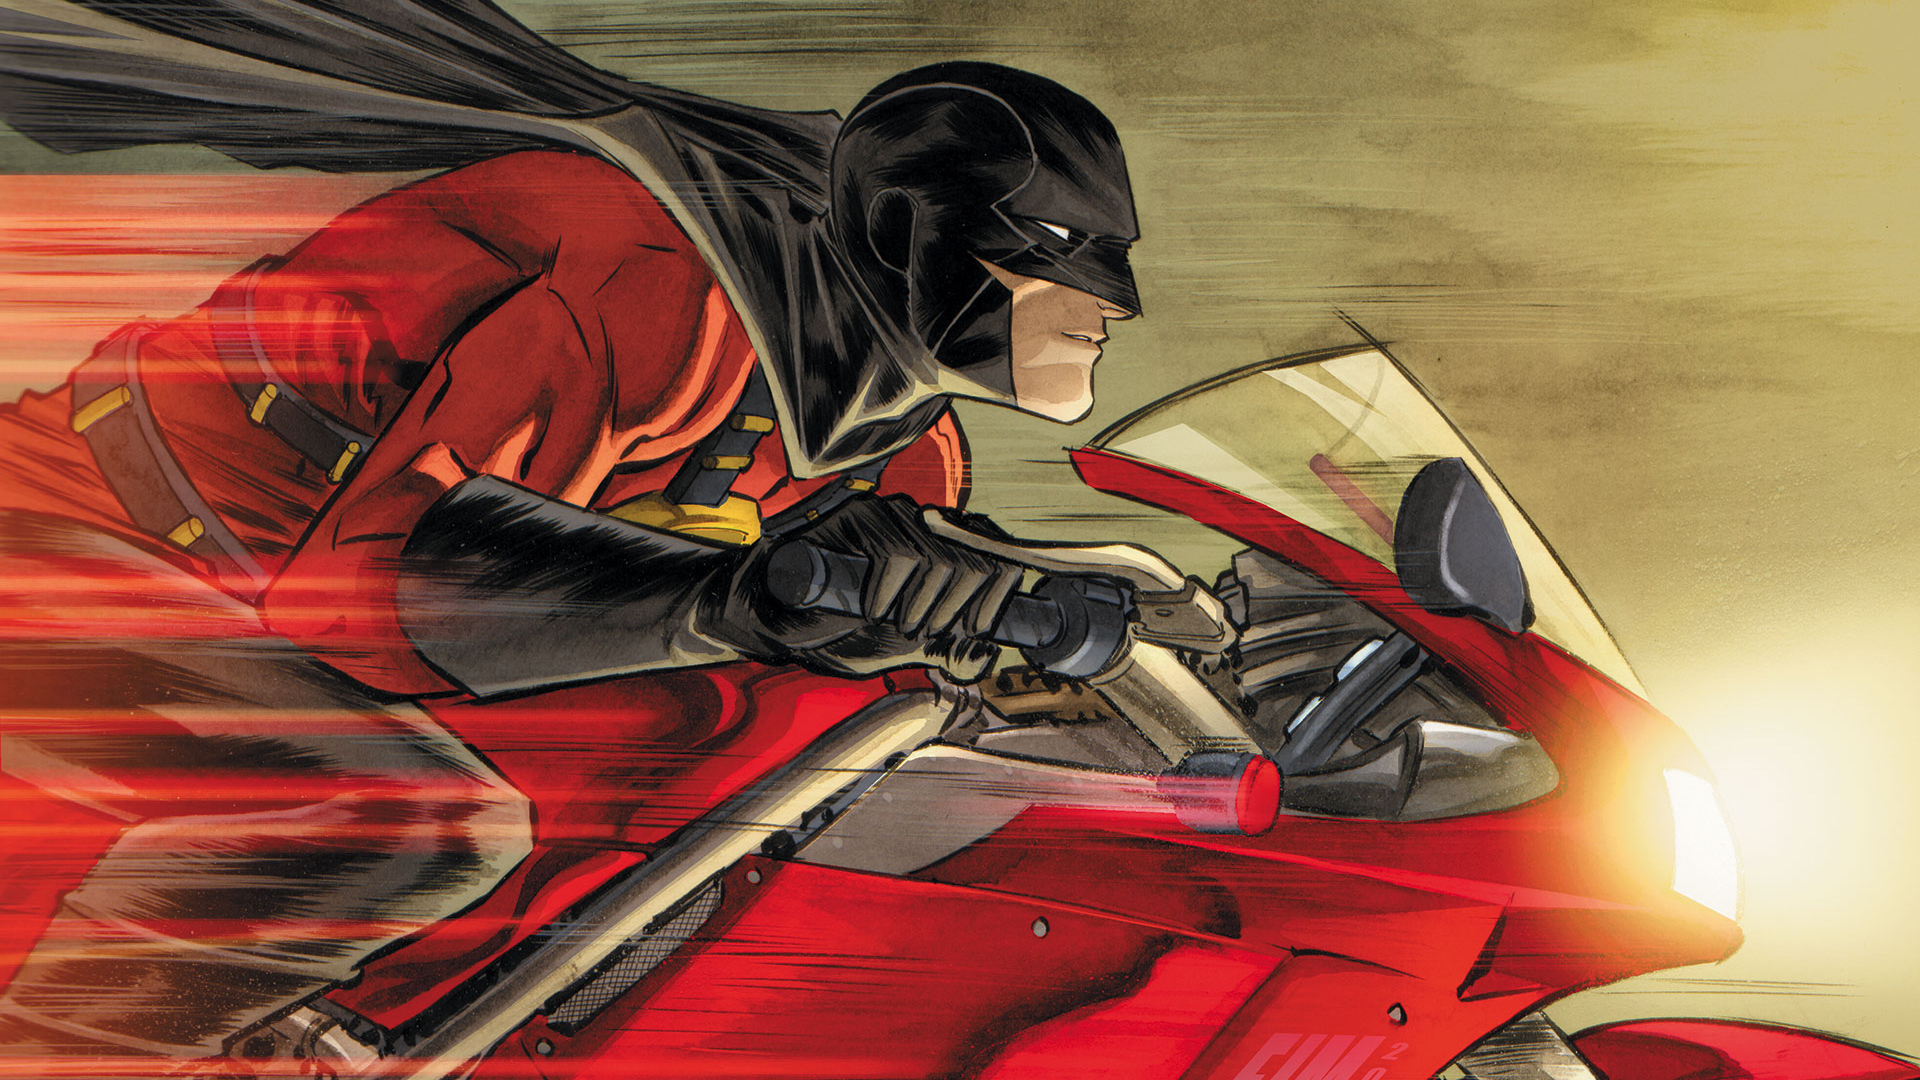 Comics Red Robin HD Wallpaper | Background Image